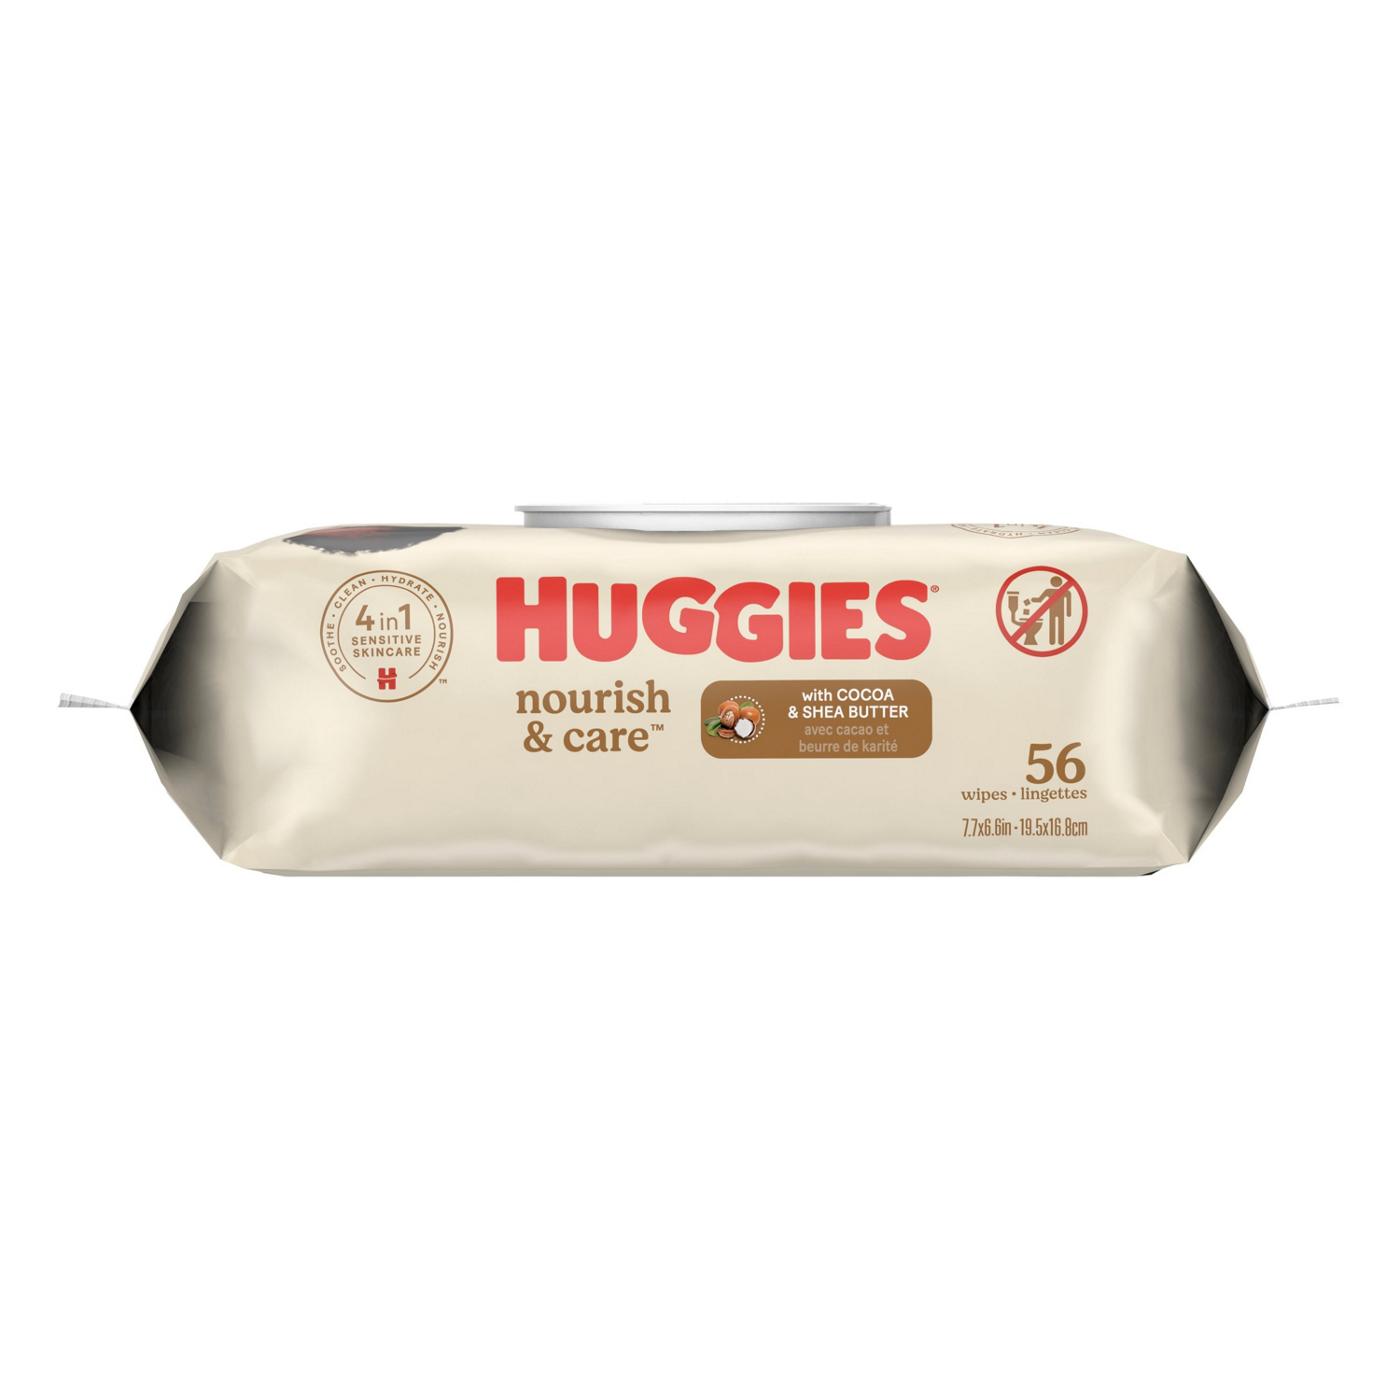 Huggies Nourish & Care Baby Wipes with Cocoa & Shea Butter; image 6 of 6